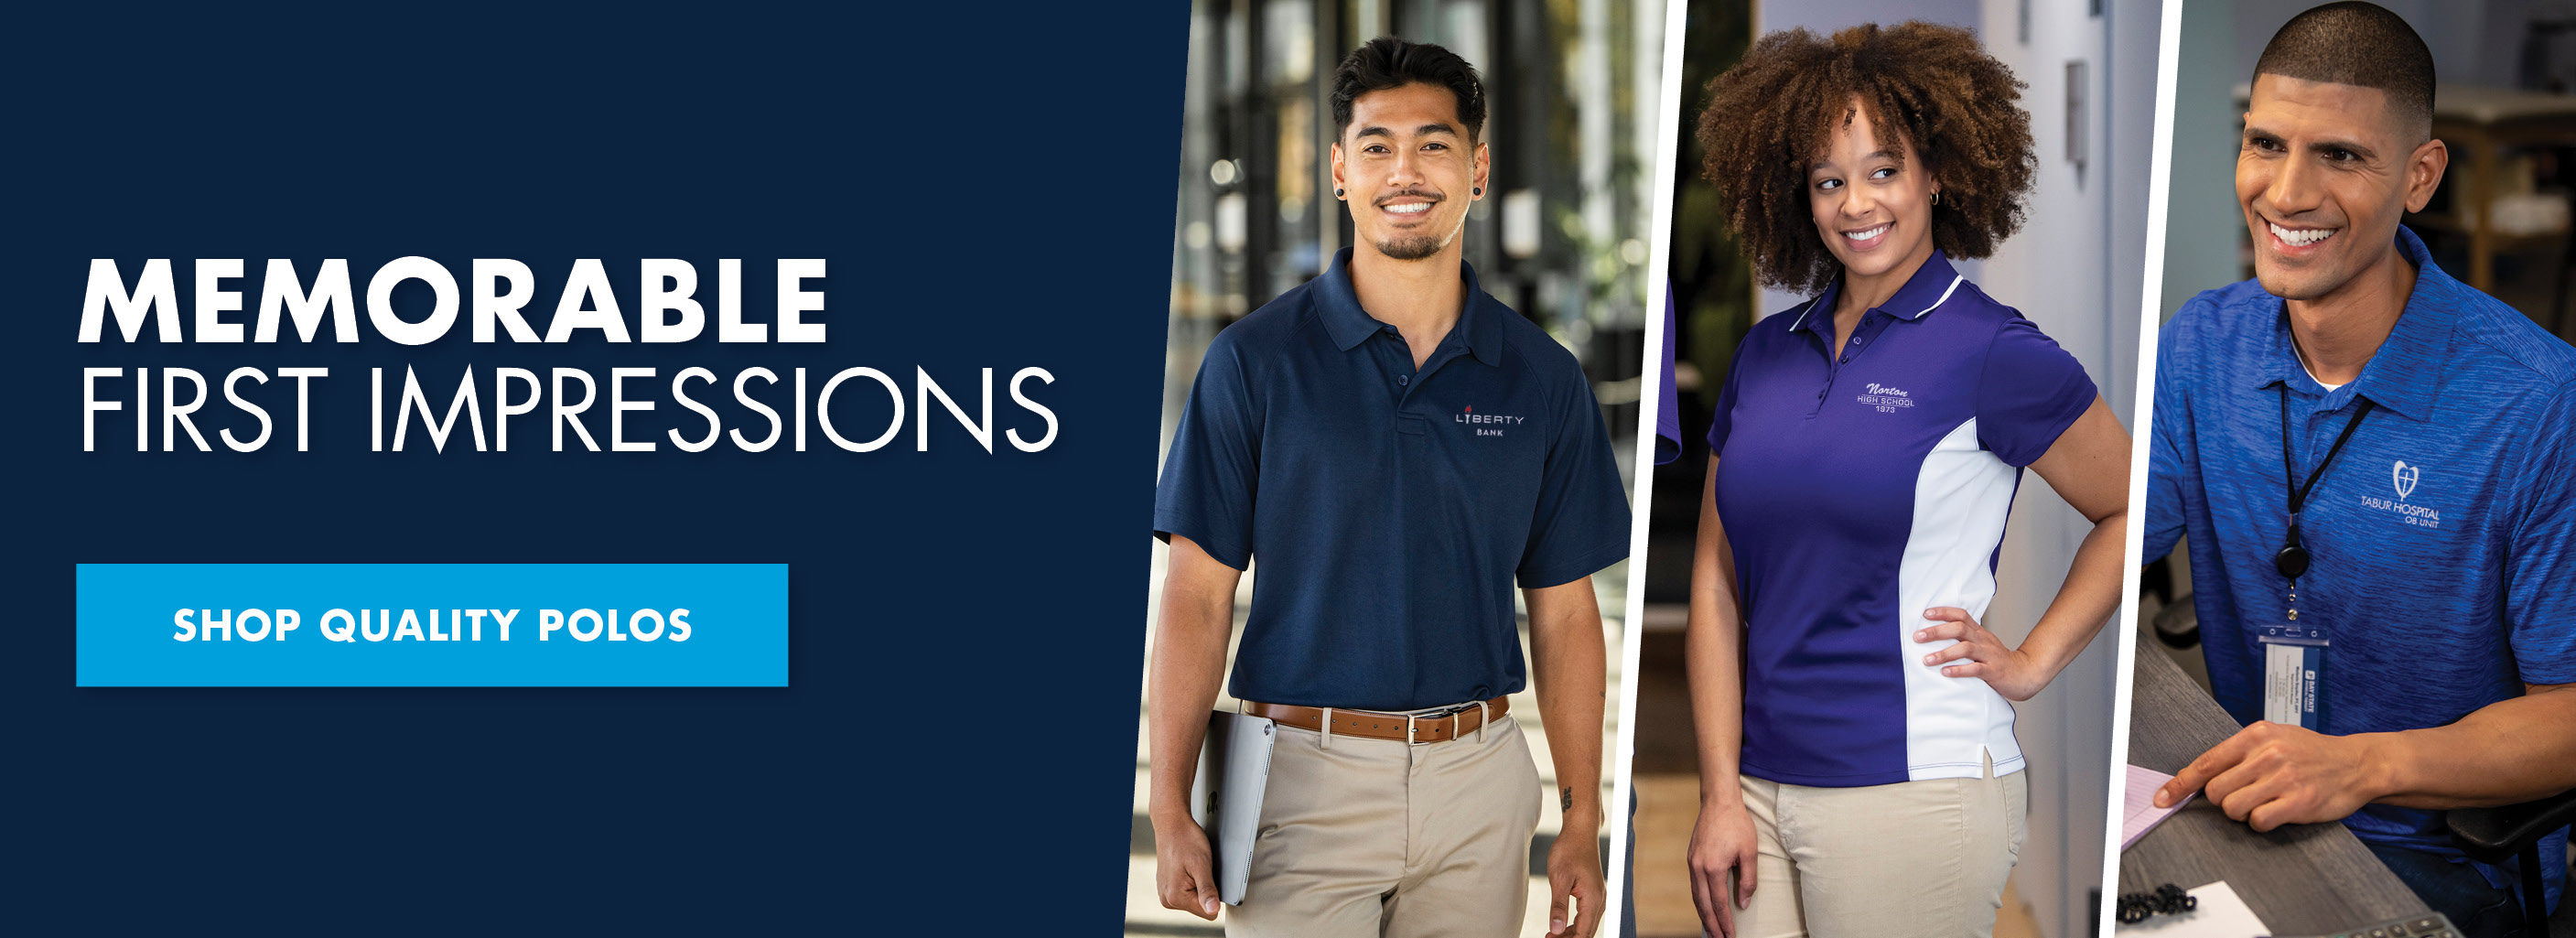 Memorable First Impressions - Shop Quality Polos